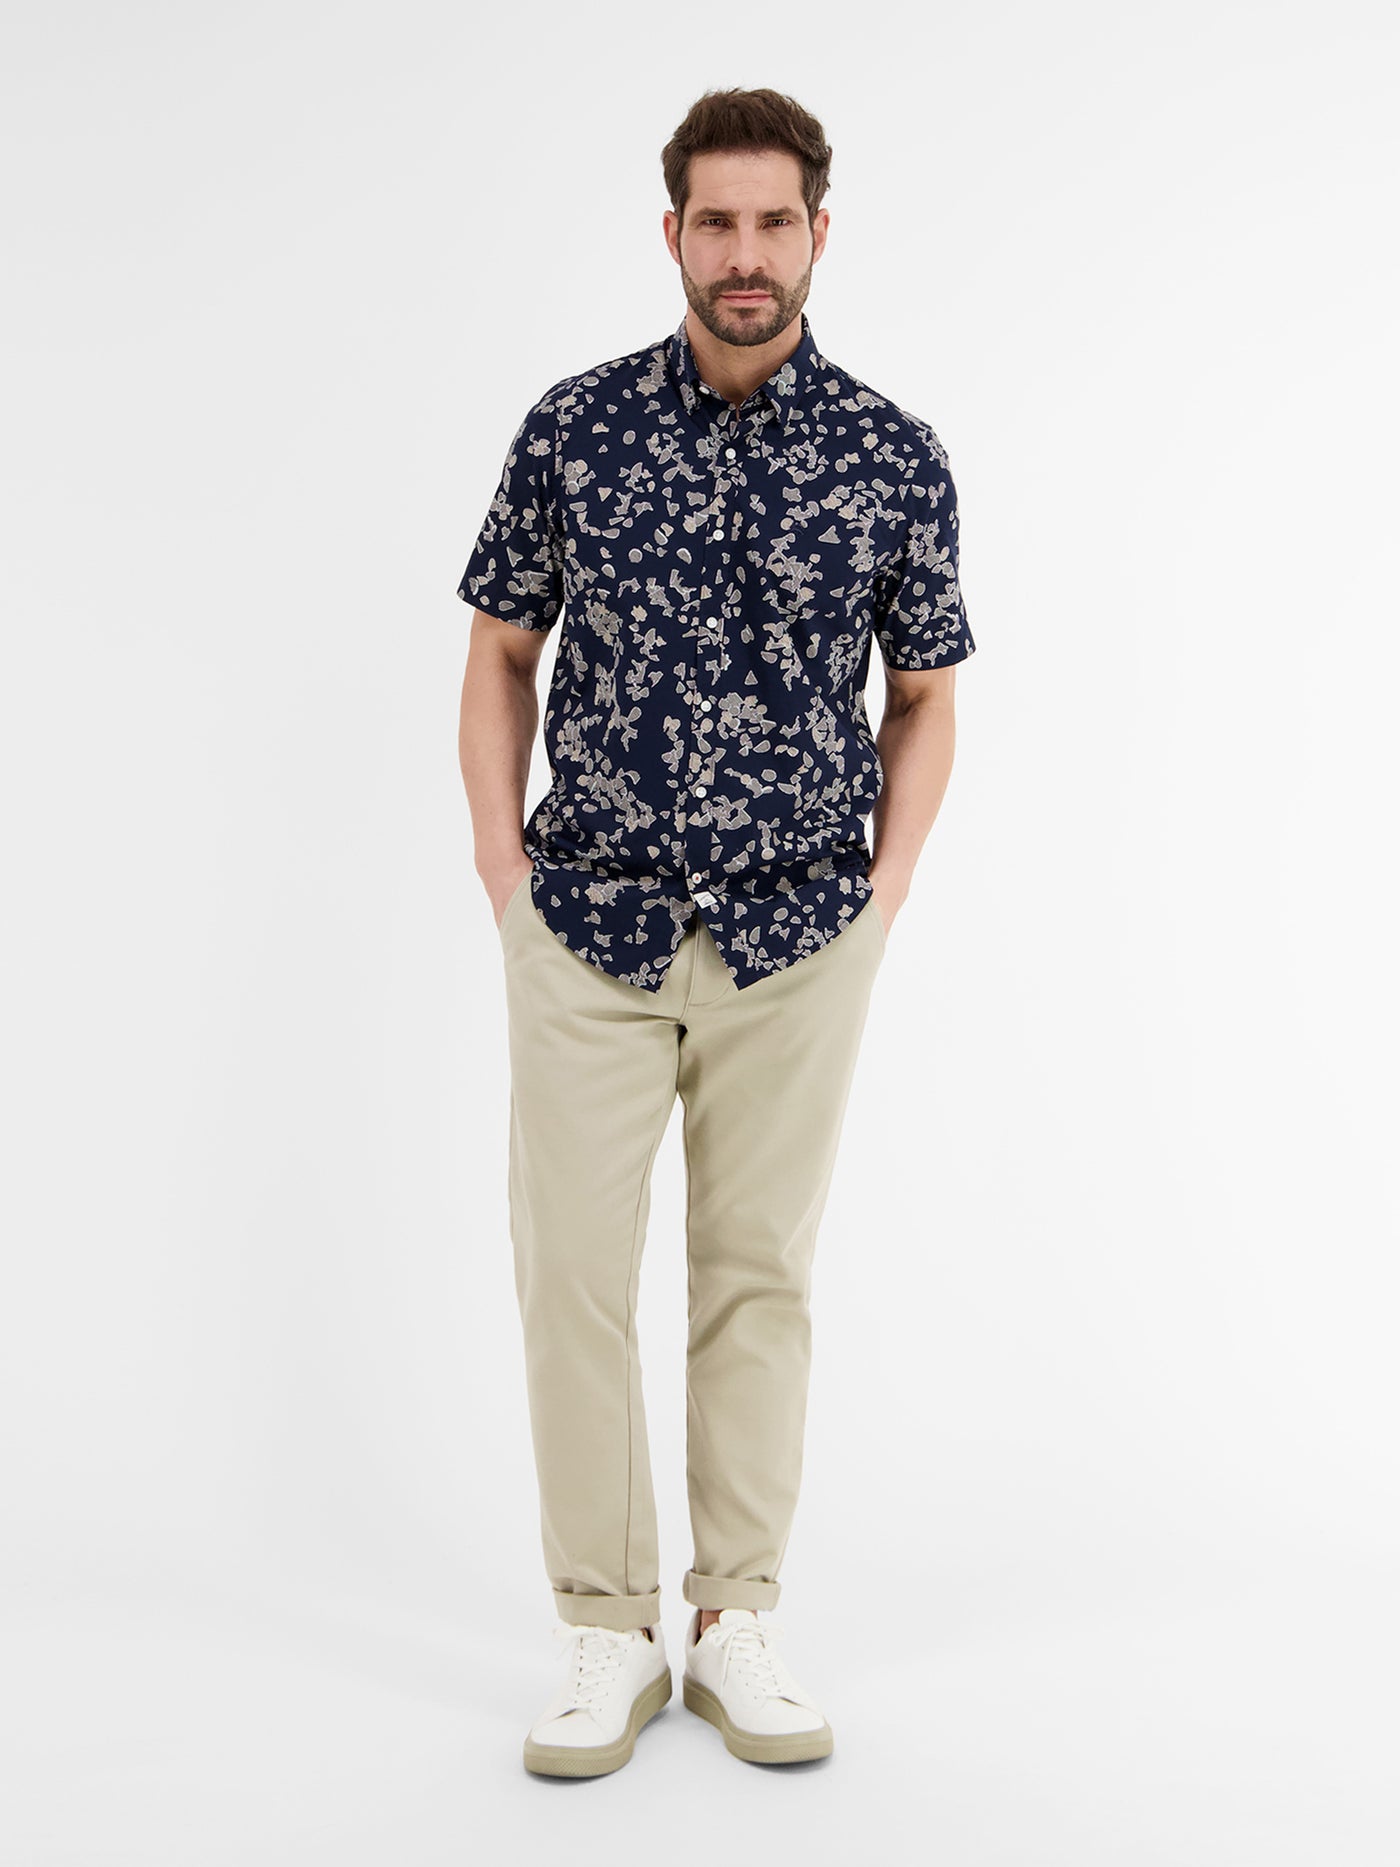 Poplin shirt with a concealed button-down collar